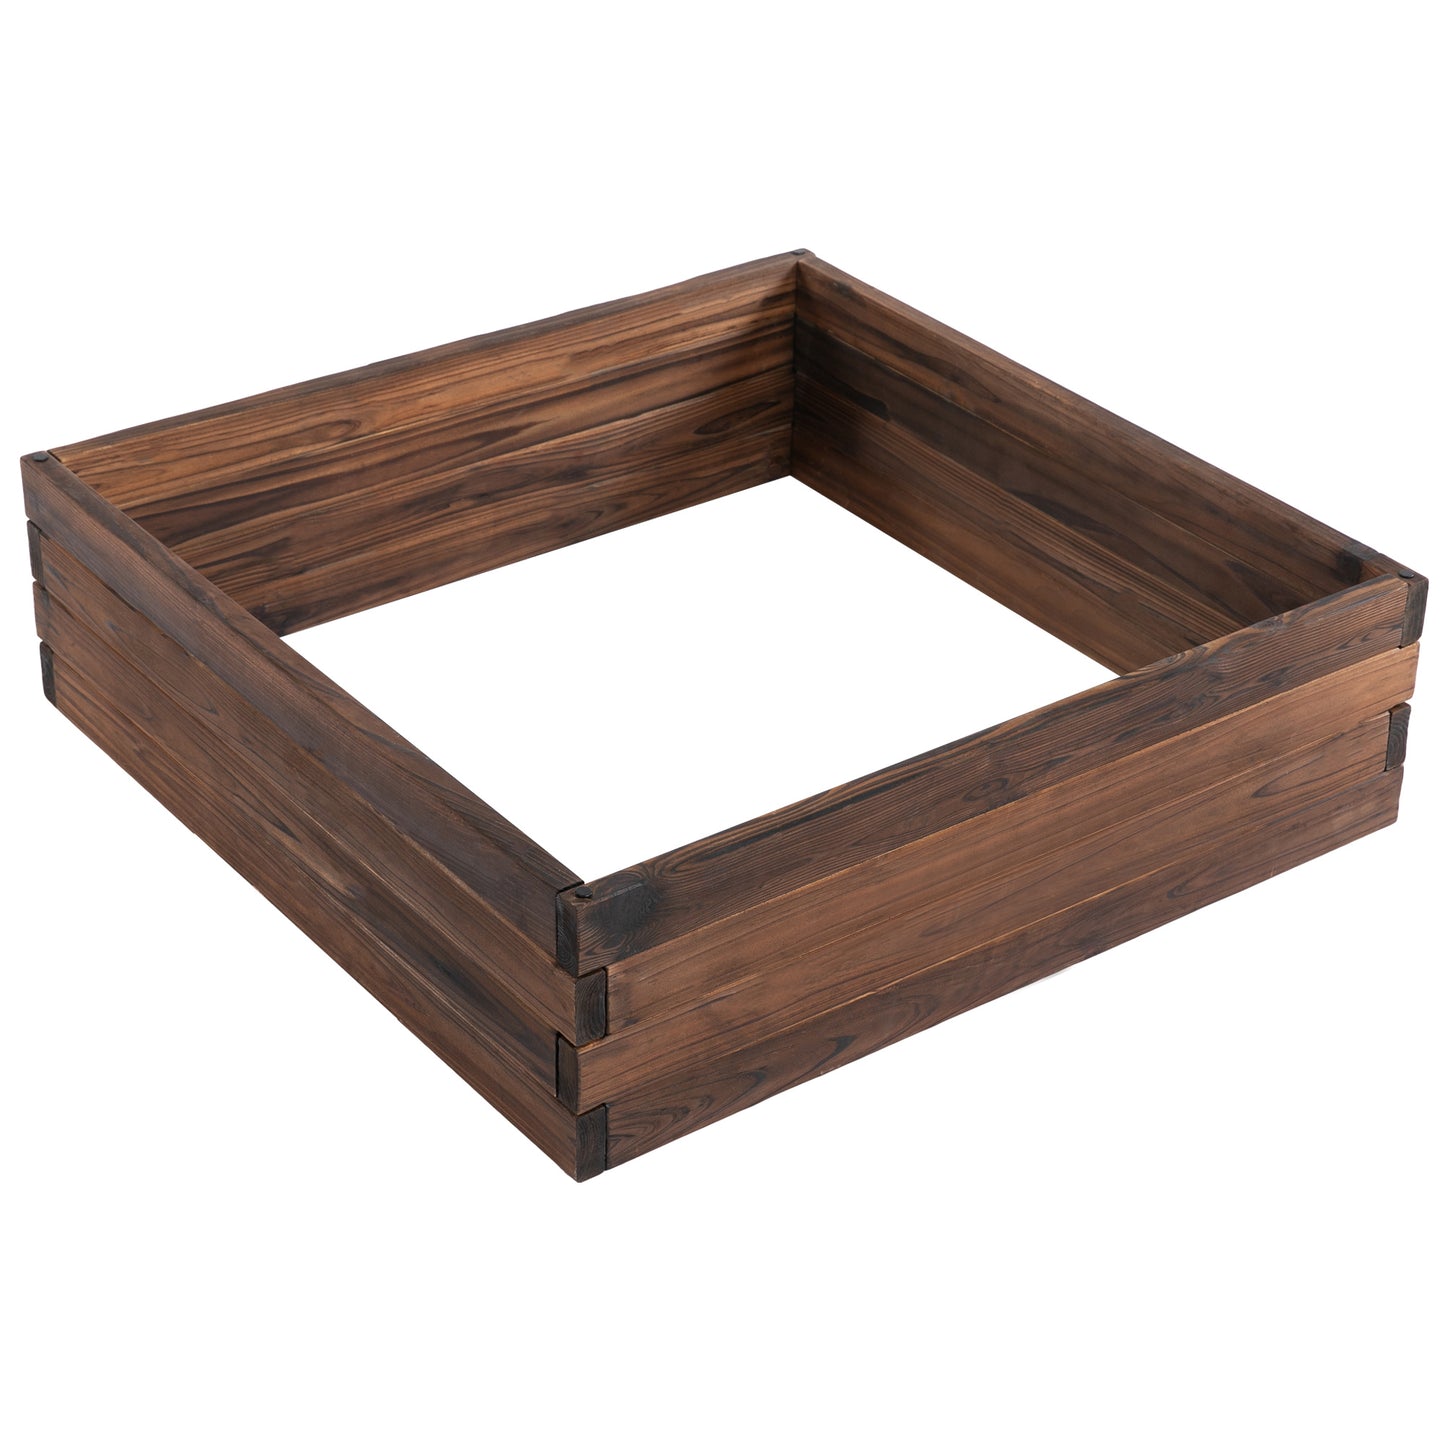 Outsunny Wooden Raised Garden Bed Planter Grow Containers Flower Vegetable Pot 80 x 80cm